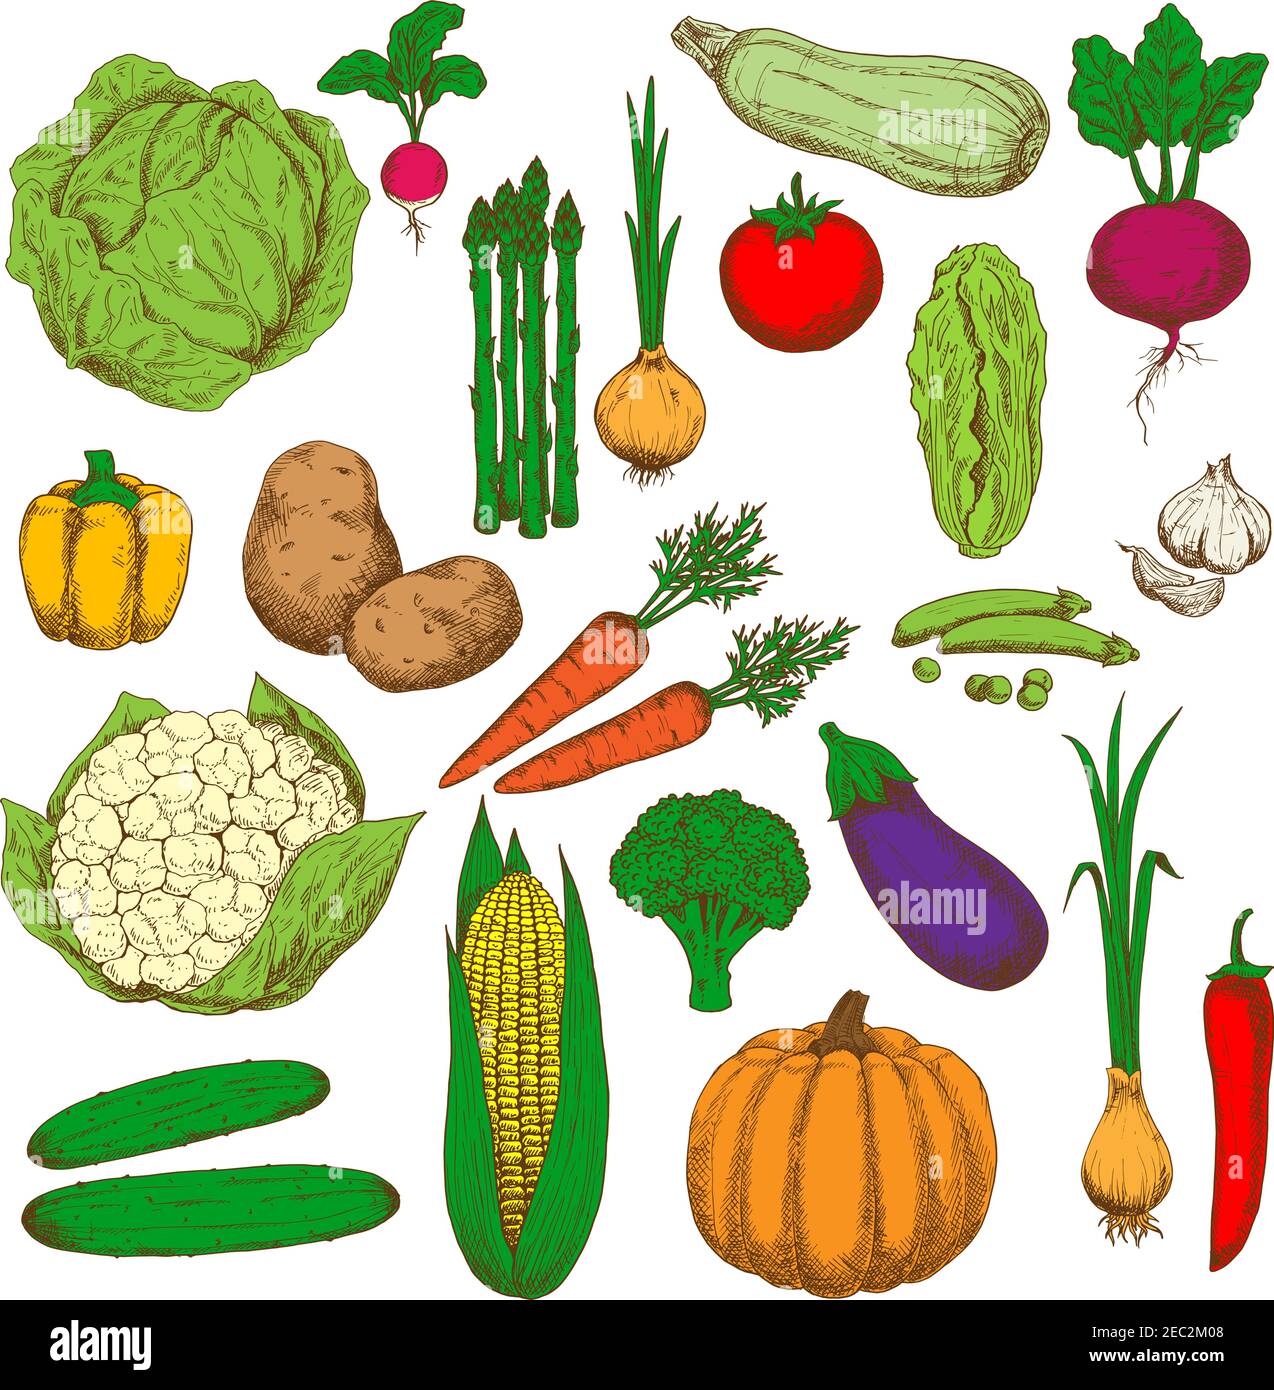 Farm fresh green cabbages and broccoli, peas and zucchini, sweet orange bell pepper and carrots, pumpkin and corn, spicy garlic, onions and cayenne pe Stock Vector